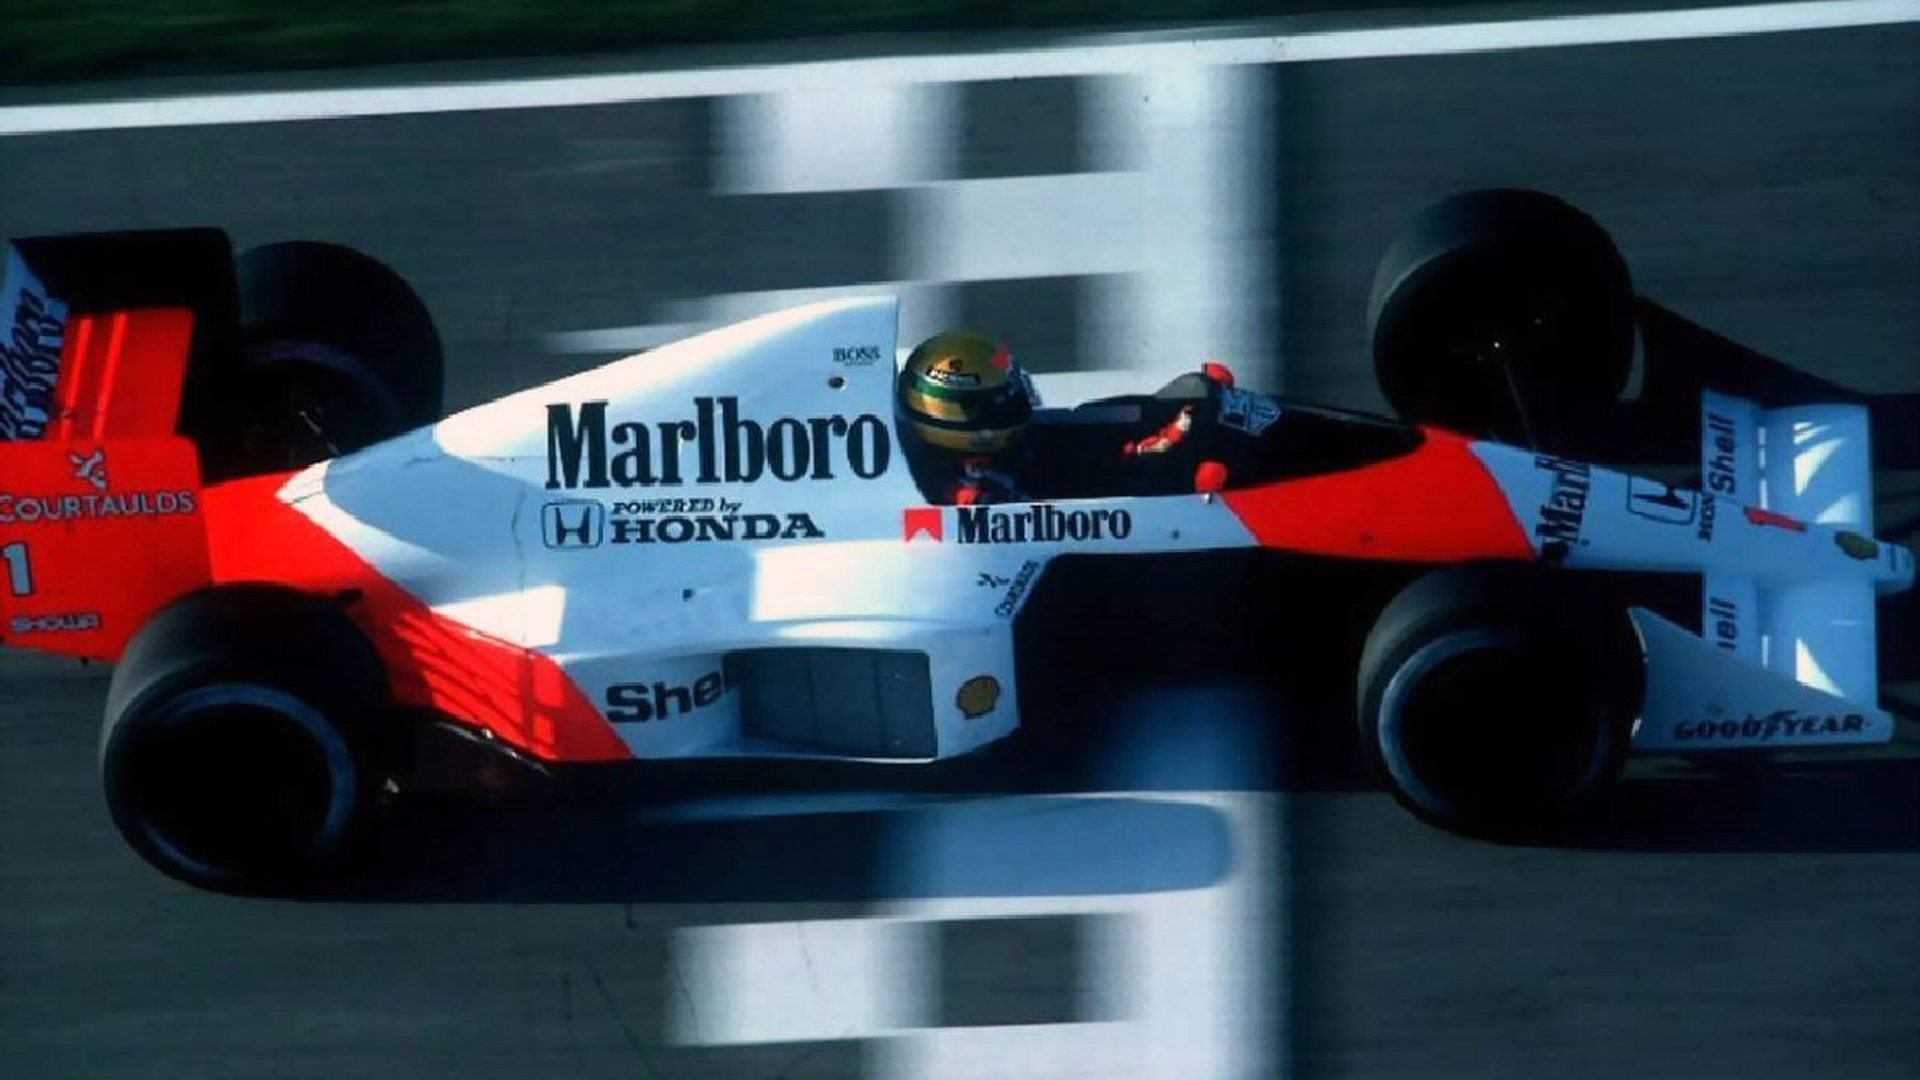 See more info about Sennas F1 career on our Ayrton Senna information